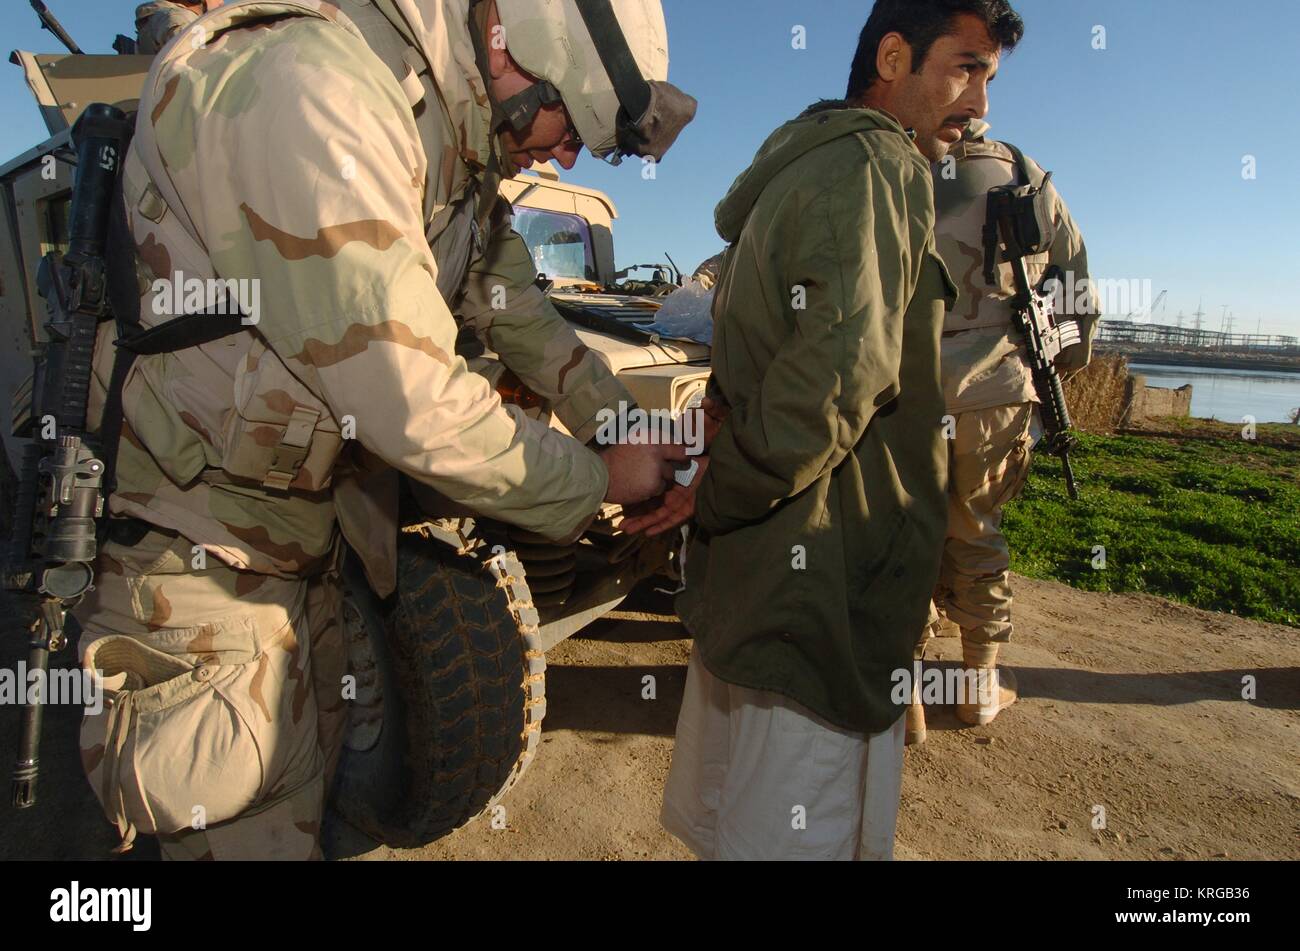 U.S. soldiers and Iraqi National Guard officers swab suspected insurgents hands for explosive residue during a raid near Forward Operating Base Dogwood March 25, 2005 in Babil Province, Iraq. Stock Photo